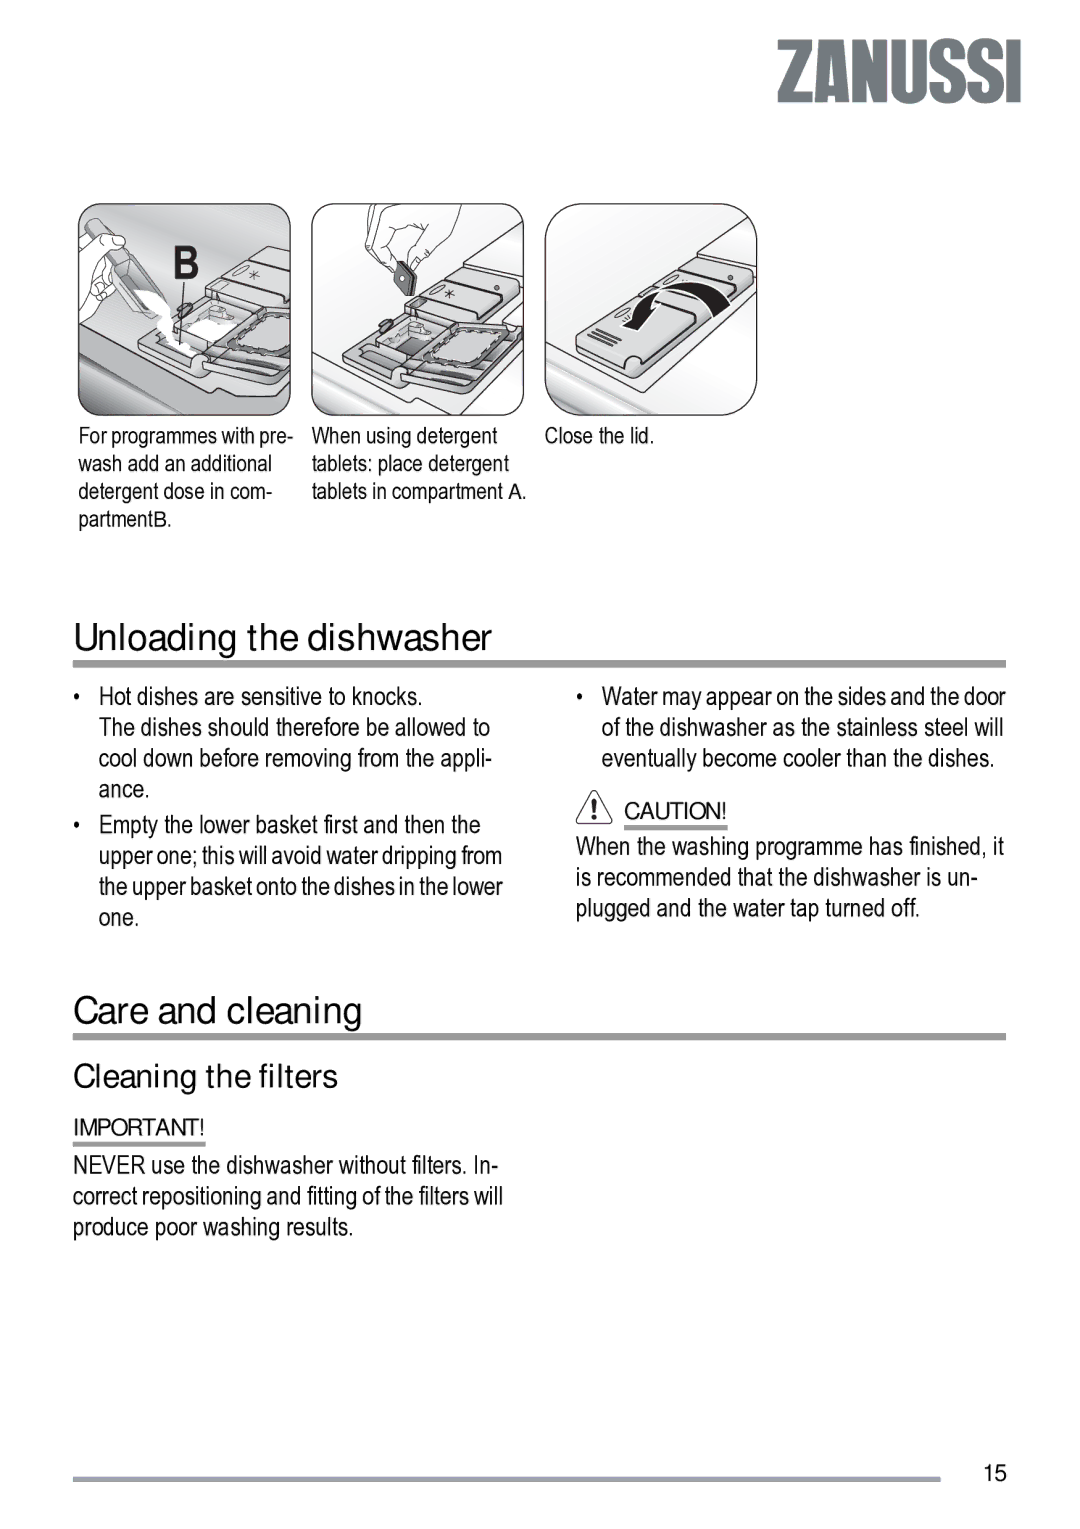 Zanussi ZDF 222 manual Unloading the dishwasher, Care and cleaning, Cleaning the filters 